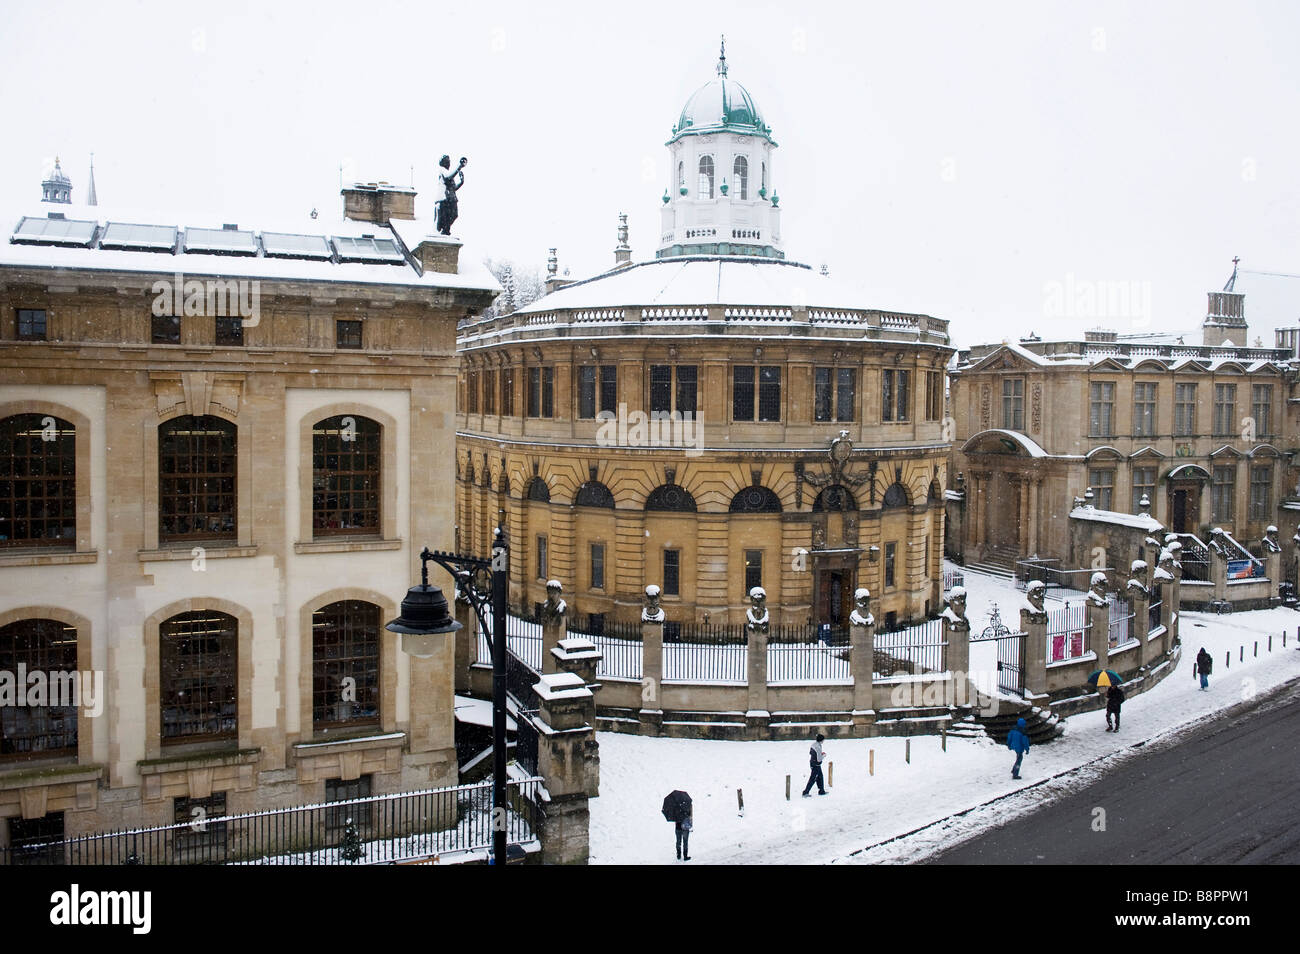 Snow covers the emperor statues and the Sheldonian theatre  with Clarendon Building on left and Science Museum on right Stock Photo